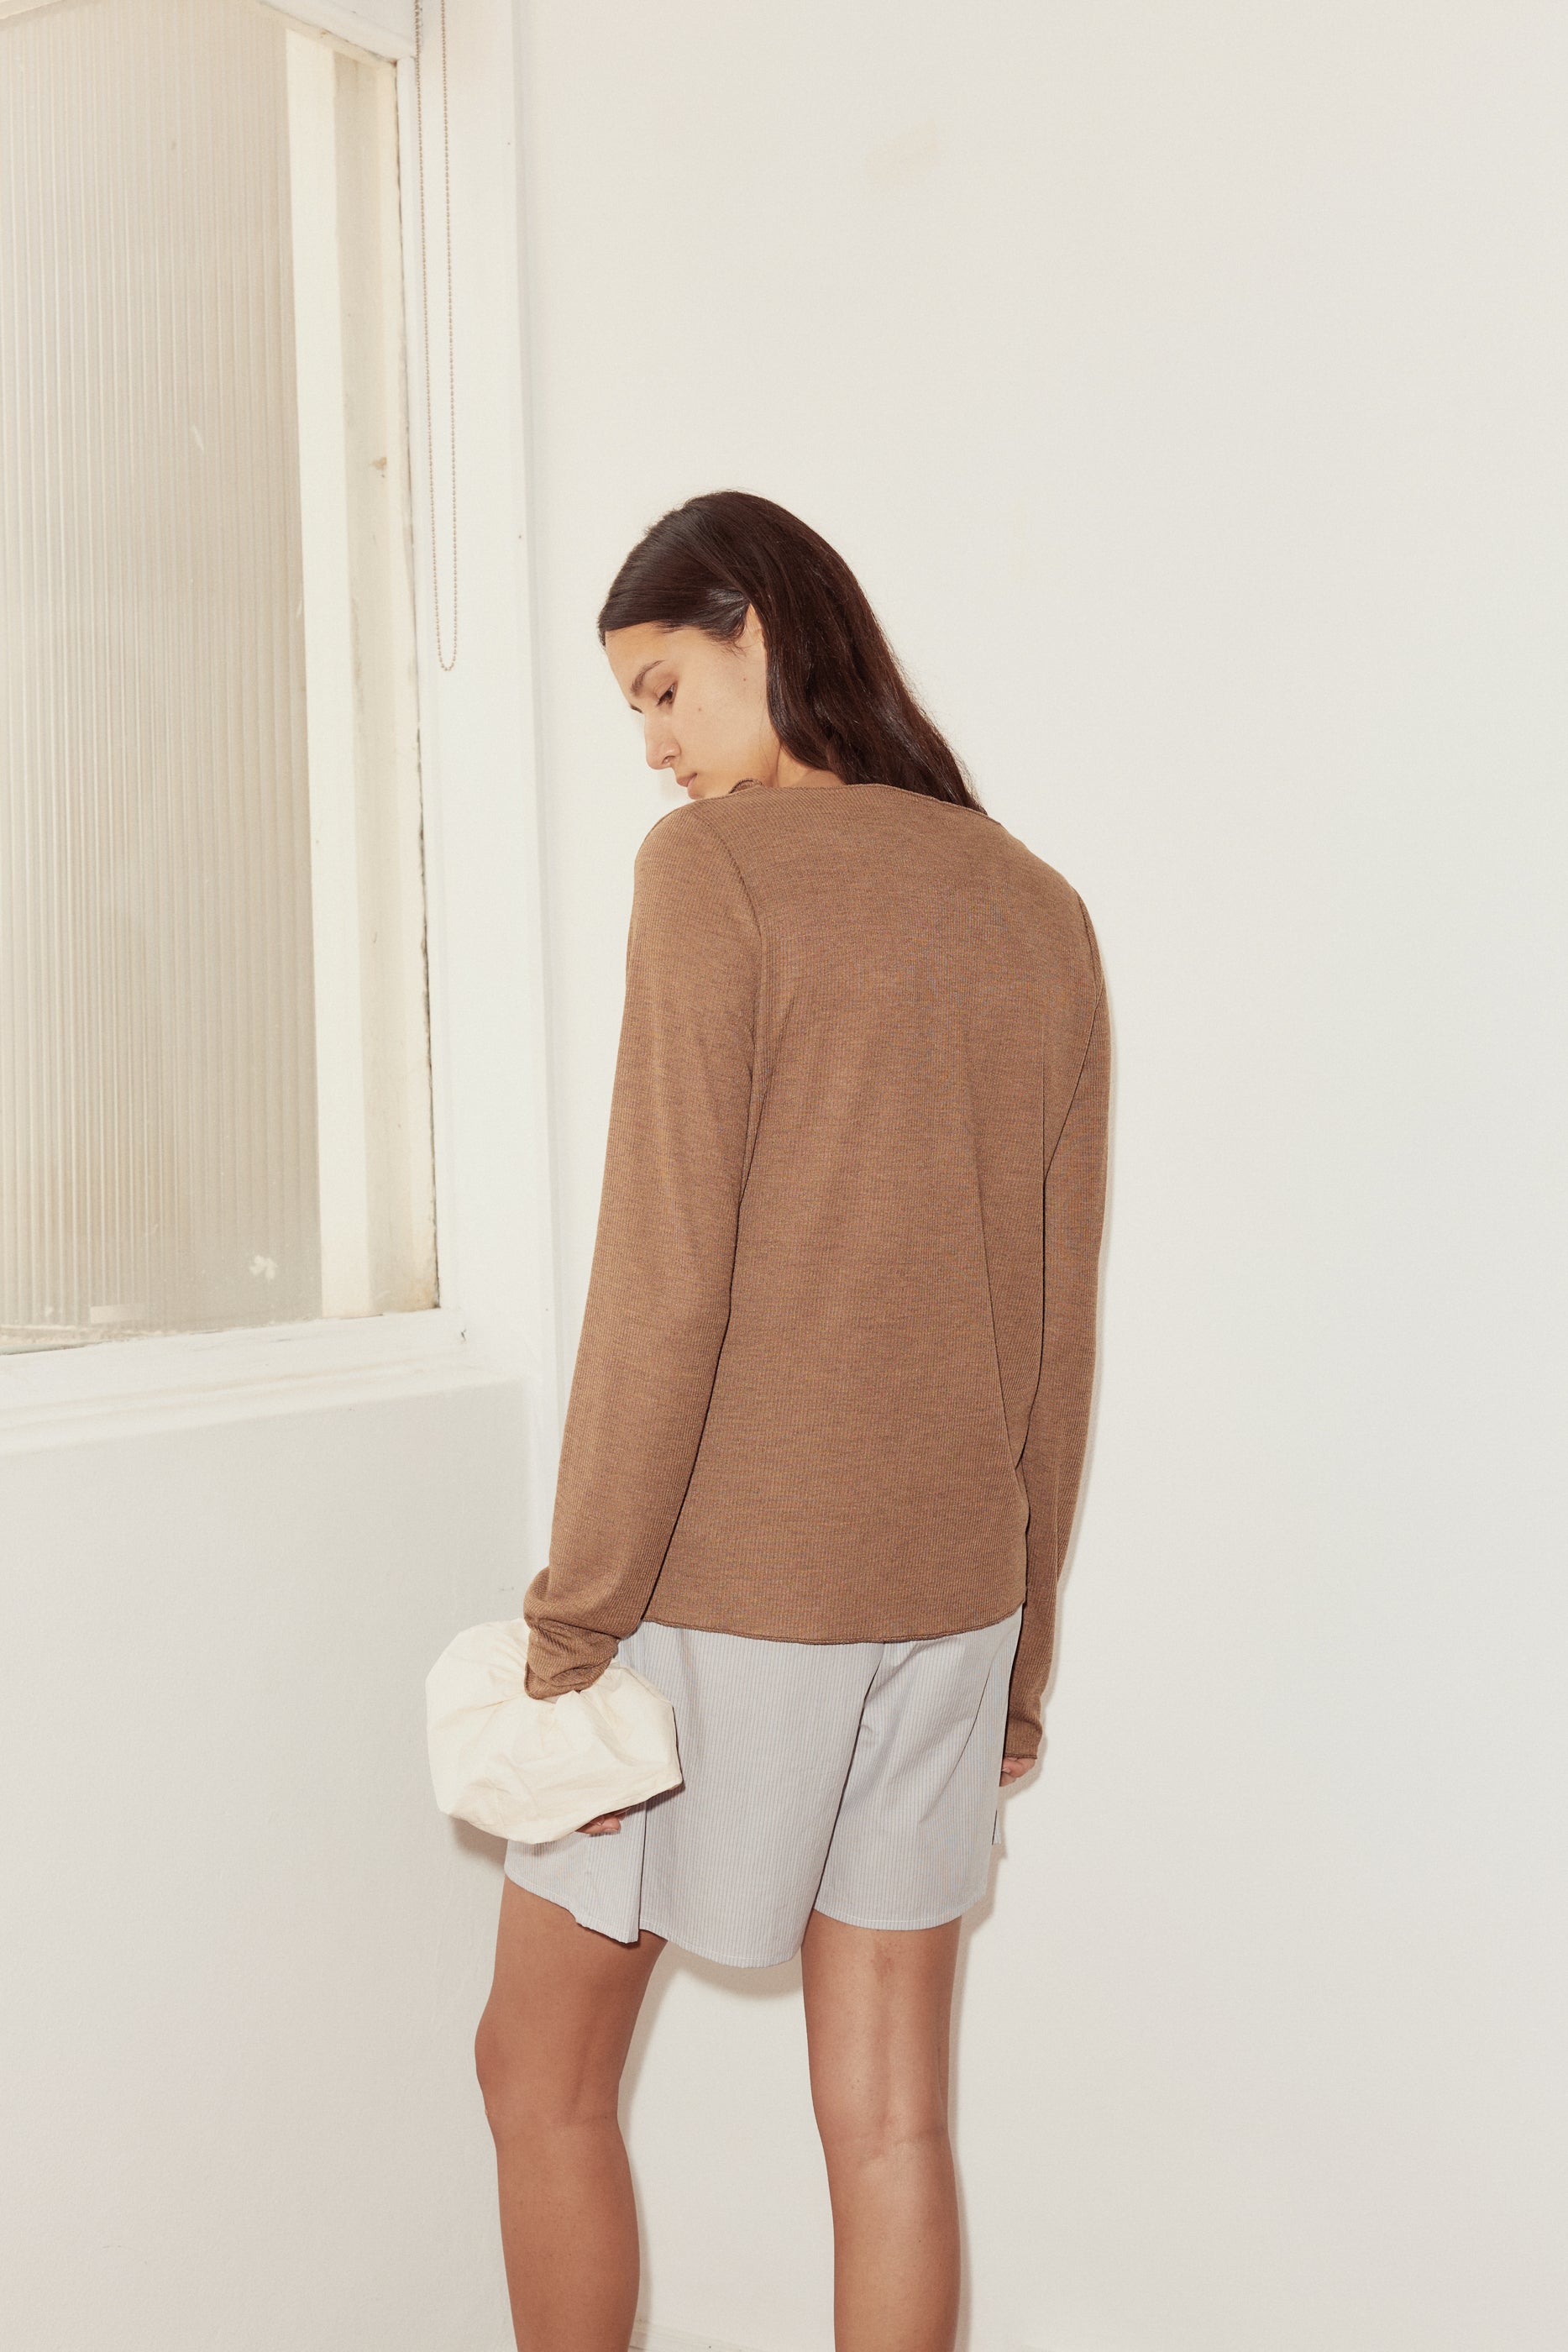 back shot of model wearing mid short in dream stripe and open long sleeve top in coffee. Short features relaxed fit and mid length.